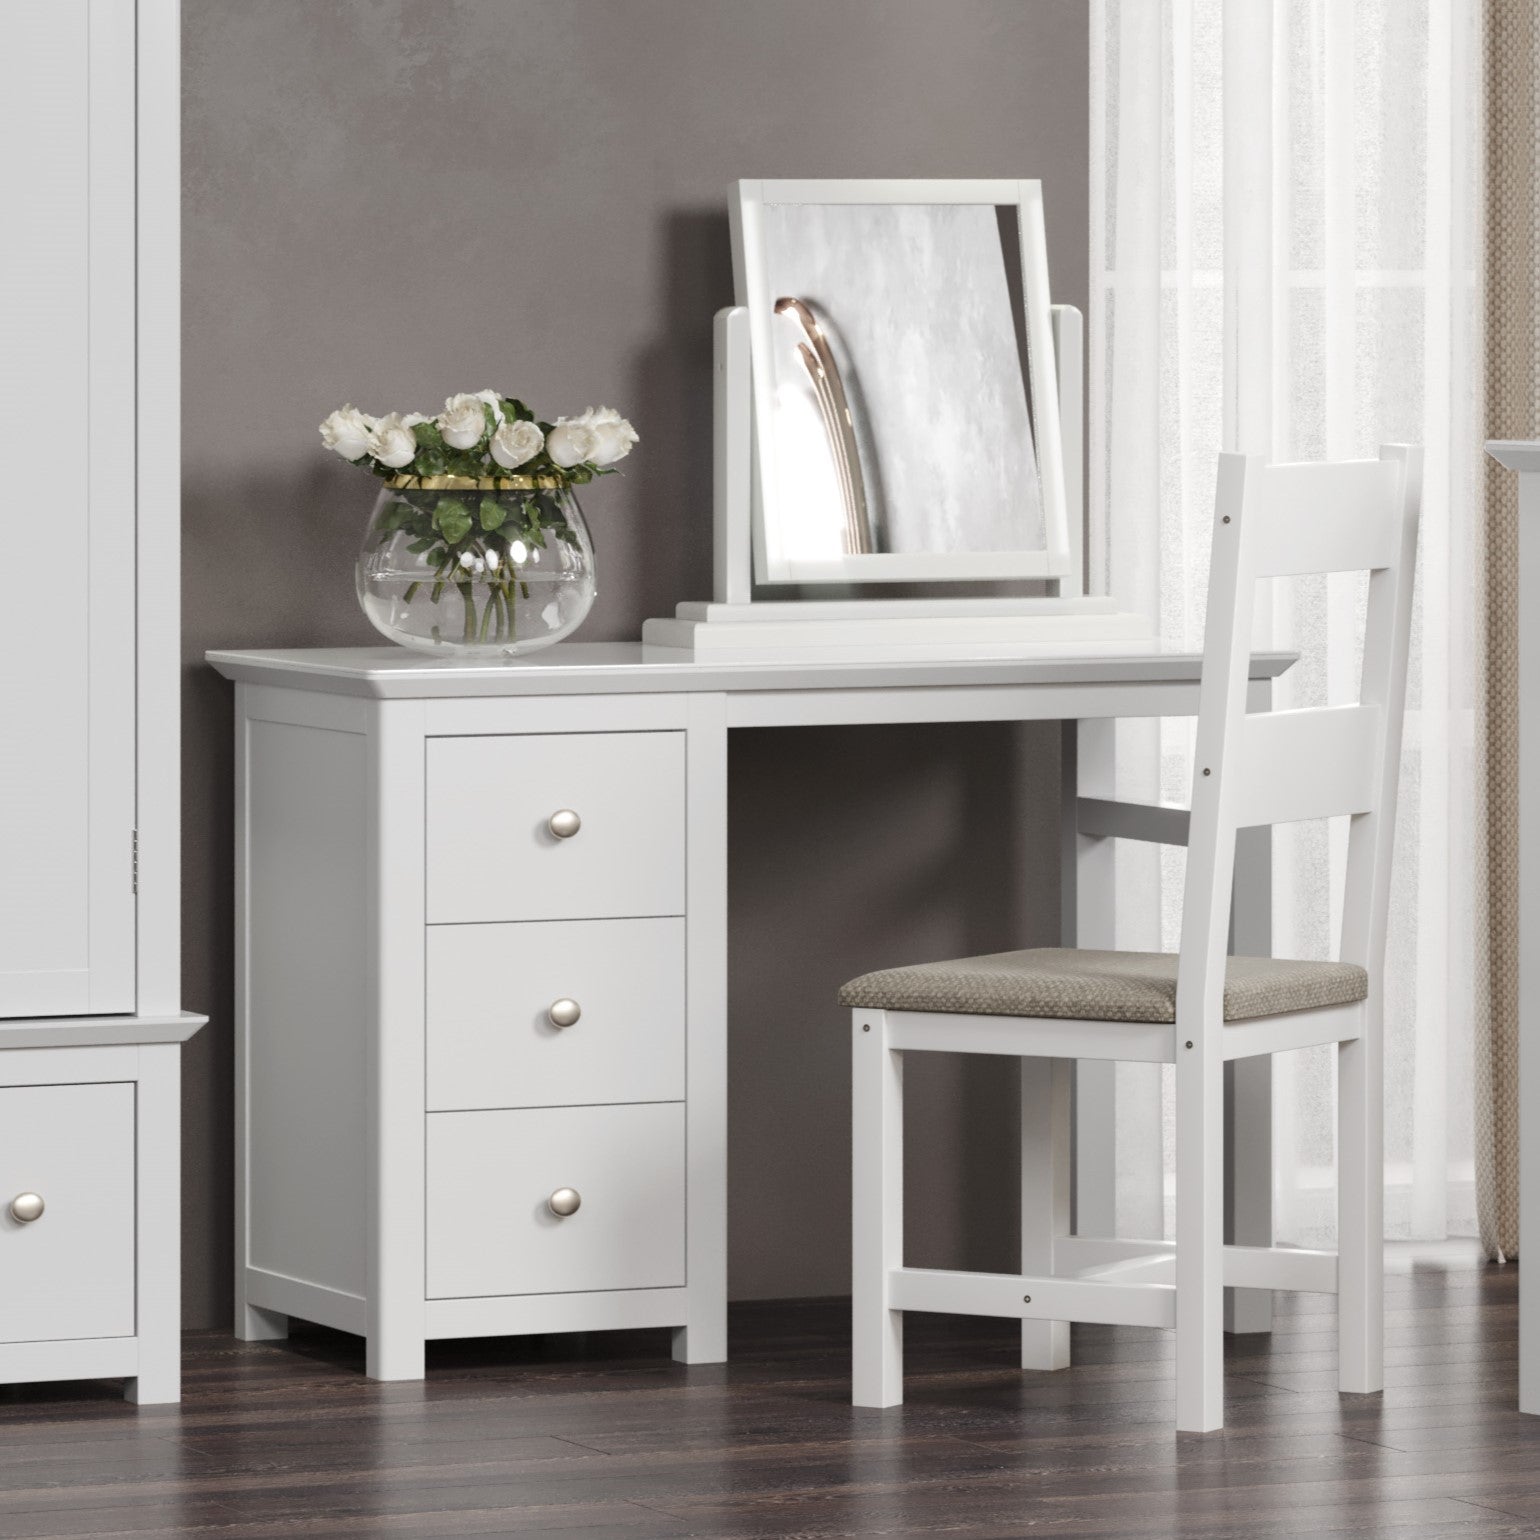 Noelia Softwood Pedestal Single Dressing Table For Core Products - CFD-NR218